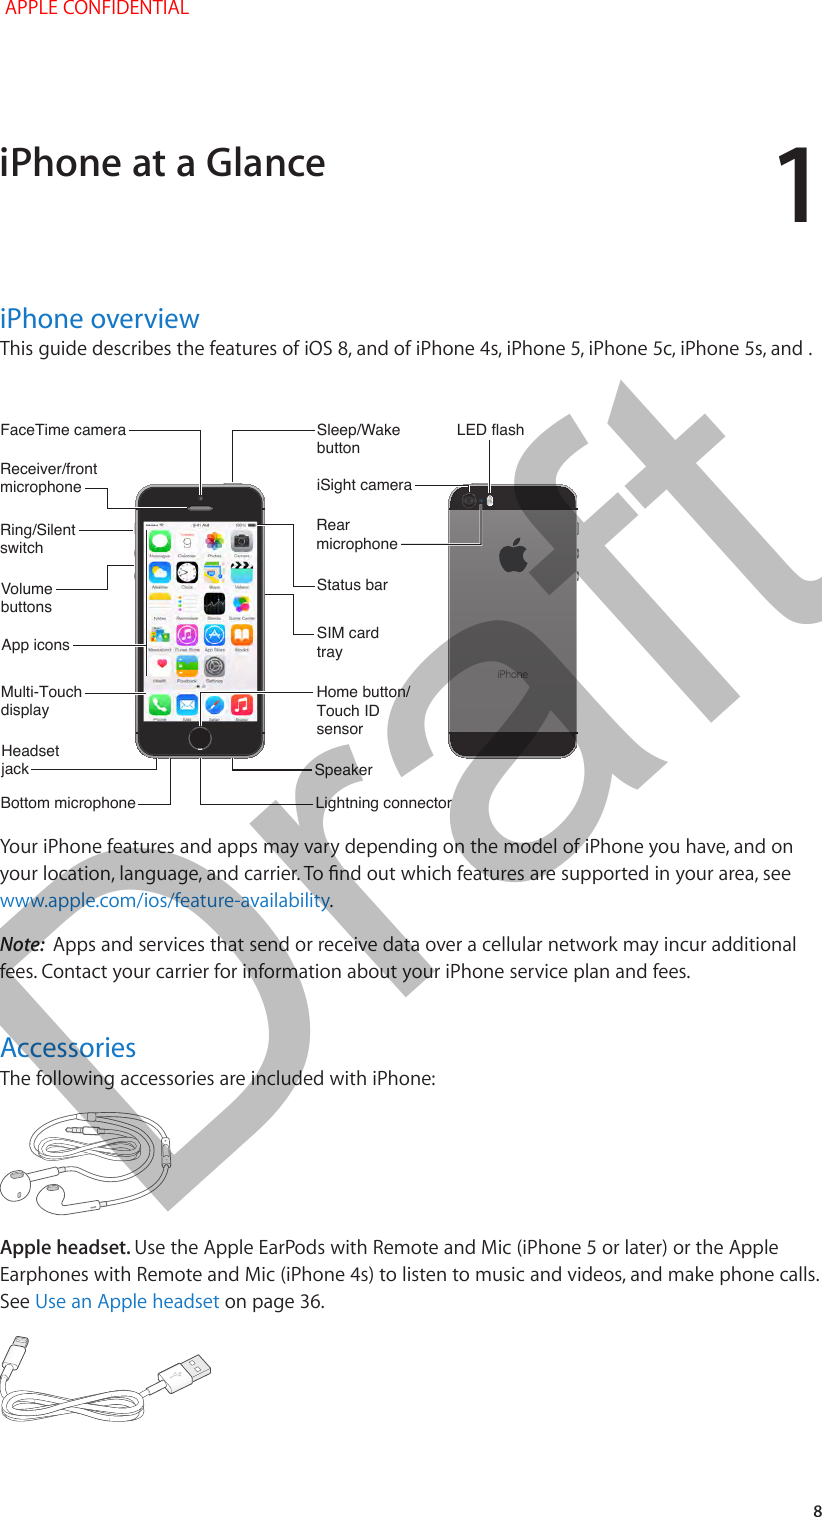 1   8iPhone overviewThis guide describes the features of iOS 8, and of iPhone 4s, iPhone 5, iPhone 5c, iPhone 5s, and . Receiver/frontmicrophoneReceiver/frontmicrophoneBottom microphoneBottom microphoneRing/SilentswitchRing/SilentswitchFaceTime cameraFaceTime cameraVolumebuttonsVolumebuttonsMulti-TouchdisplayMulti-TouchdisplayHomebutton/Touch IDsensorHomebutton/Touch IDsensorHeadsetjackHeadsetjackSleep/WakebuttonSleep/WakebuttonRearmicrophoneRearmicrophoneSIM cardtraySIM cardtrayLED flashLED flashiSight cameraiSight cameraApp iconsApp iconsStatusbarStatusbarLightning connectorLightning connectorSpeakerSpeakerYour iPhone features and apps may vary depending on the model of iPhone you have, and on your location, language, and carrier. To nd out which features are supported in your area, see www.apple.com/ios/feature-availability.Note:  Apps and services that send or receive data over a cellular network may incur additional fees. Contact your carrier for information about your iPhone service plan and fees.AccessoriesThe following accessories are included with iPhone:Apple headset. Use the Apple EarPods with Remote and Mic (iPhone 5 or later) or the Apple Earphones with Remote and Mic (iPhone 4s) to listen to music and videos, and make phone calls. See Use an Apple headset on page 36.iPhone at a Glance APPLE CONFIDENTIALDraft